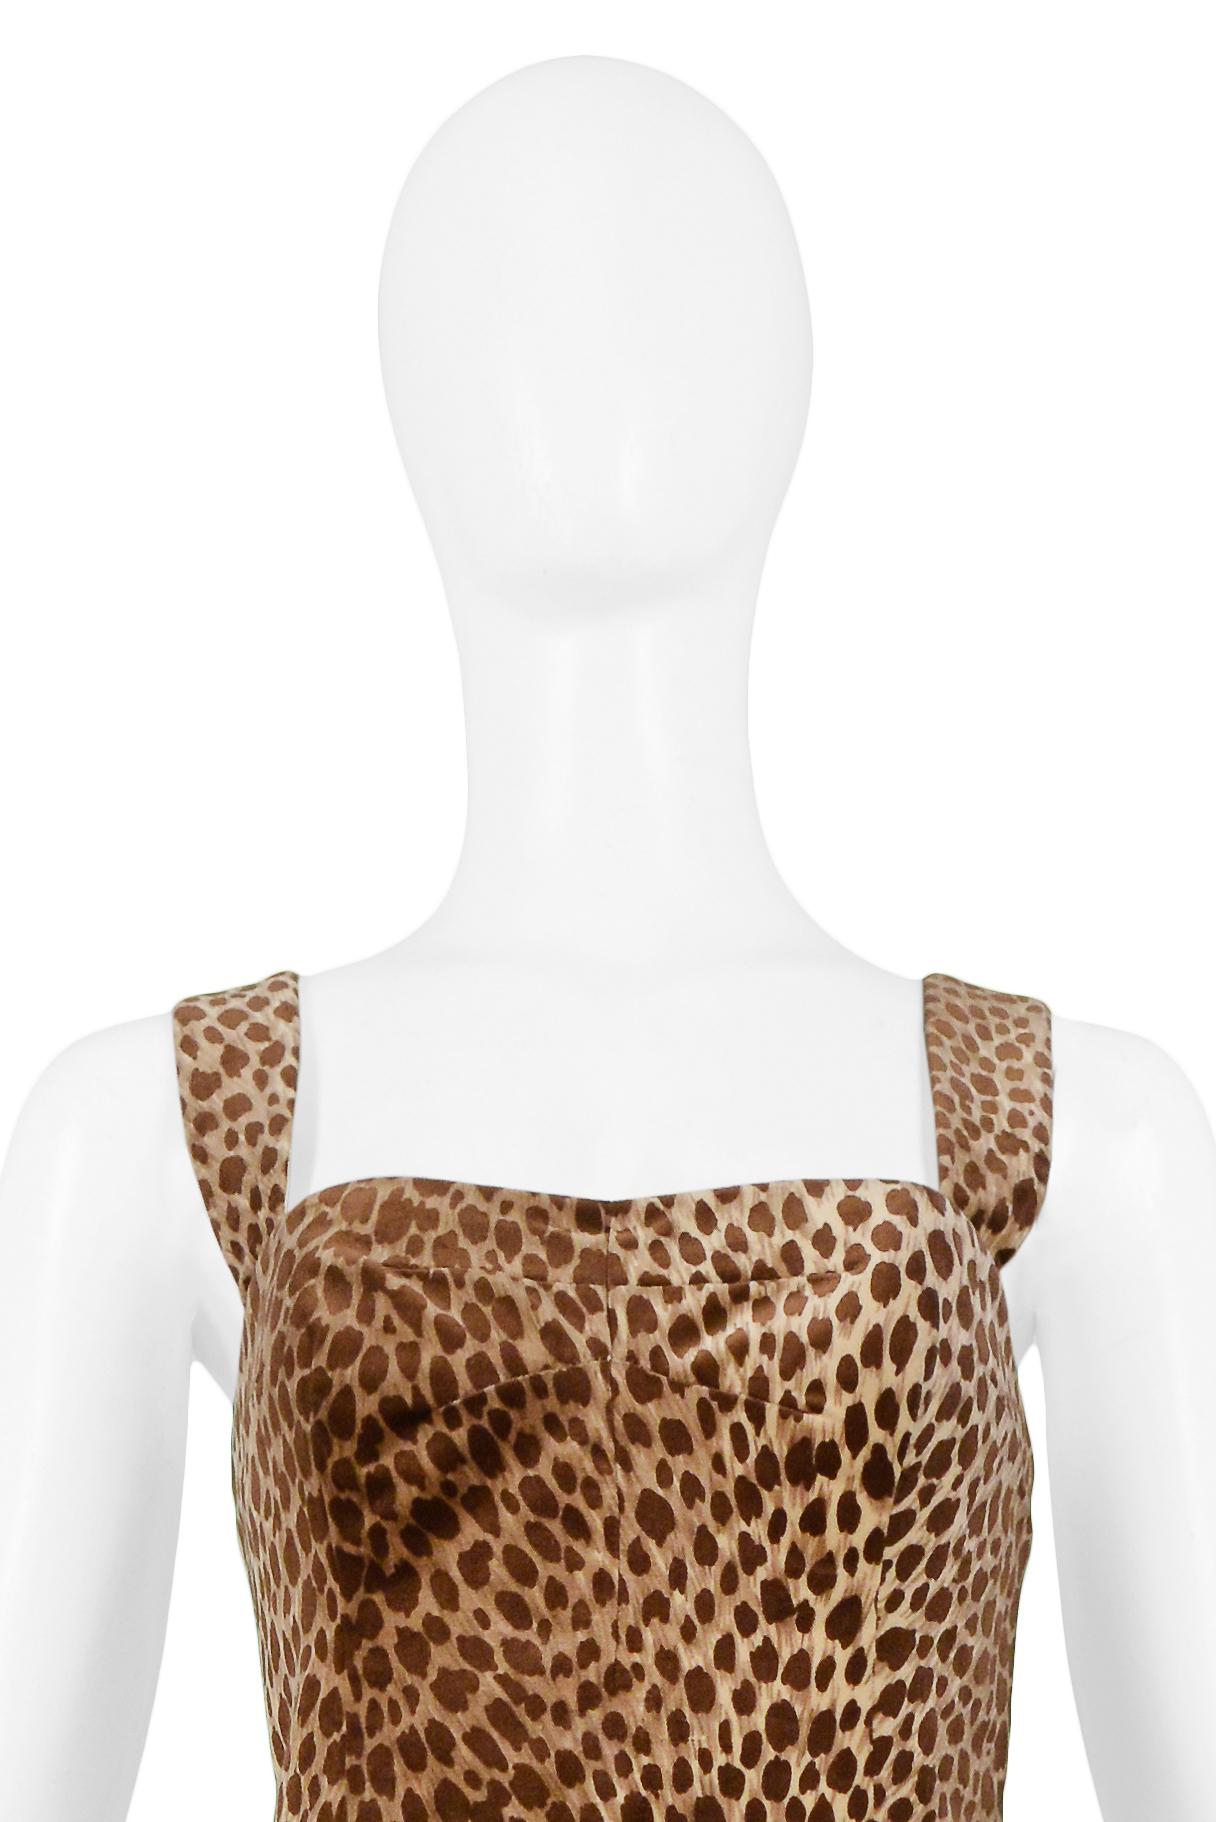 Resurrection Vintage is excited to offer a vintage Dolce & Gabbana cotton velvet leopard cocktail dress.  The dress features wide shoulder straps, built-in cups, invisible back zipper closure and is fully lined. 

Dolce & Gabbana
Size 42
Cotton